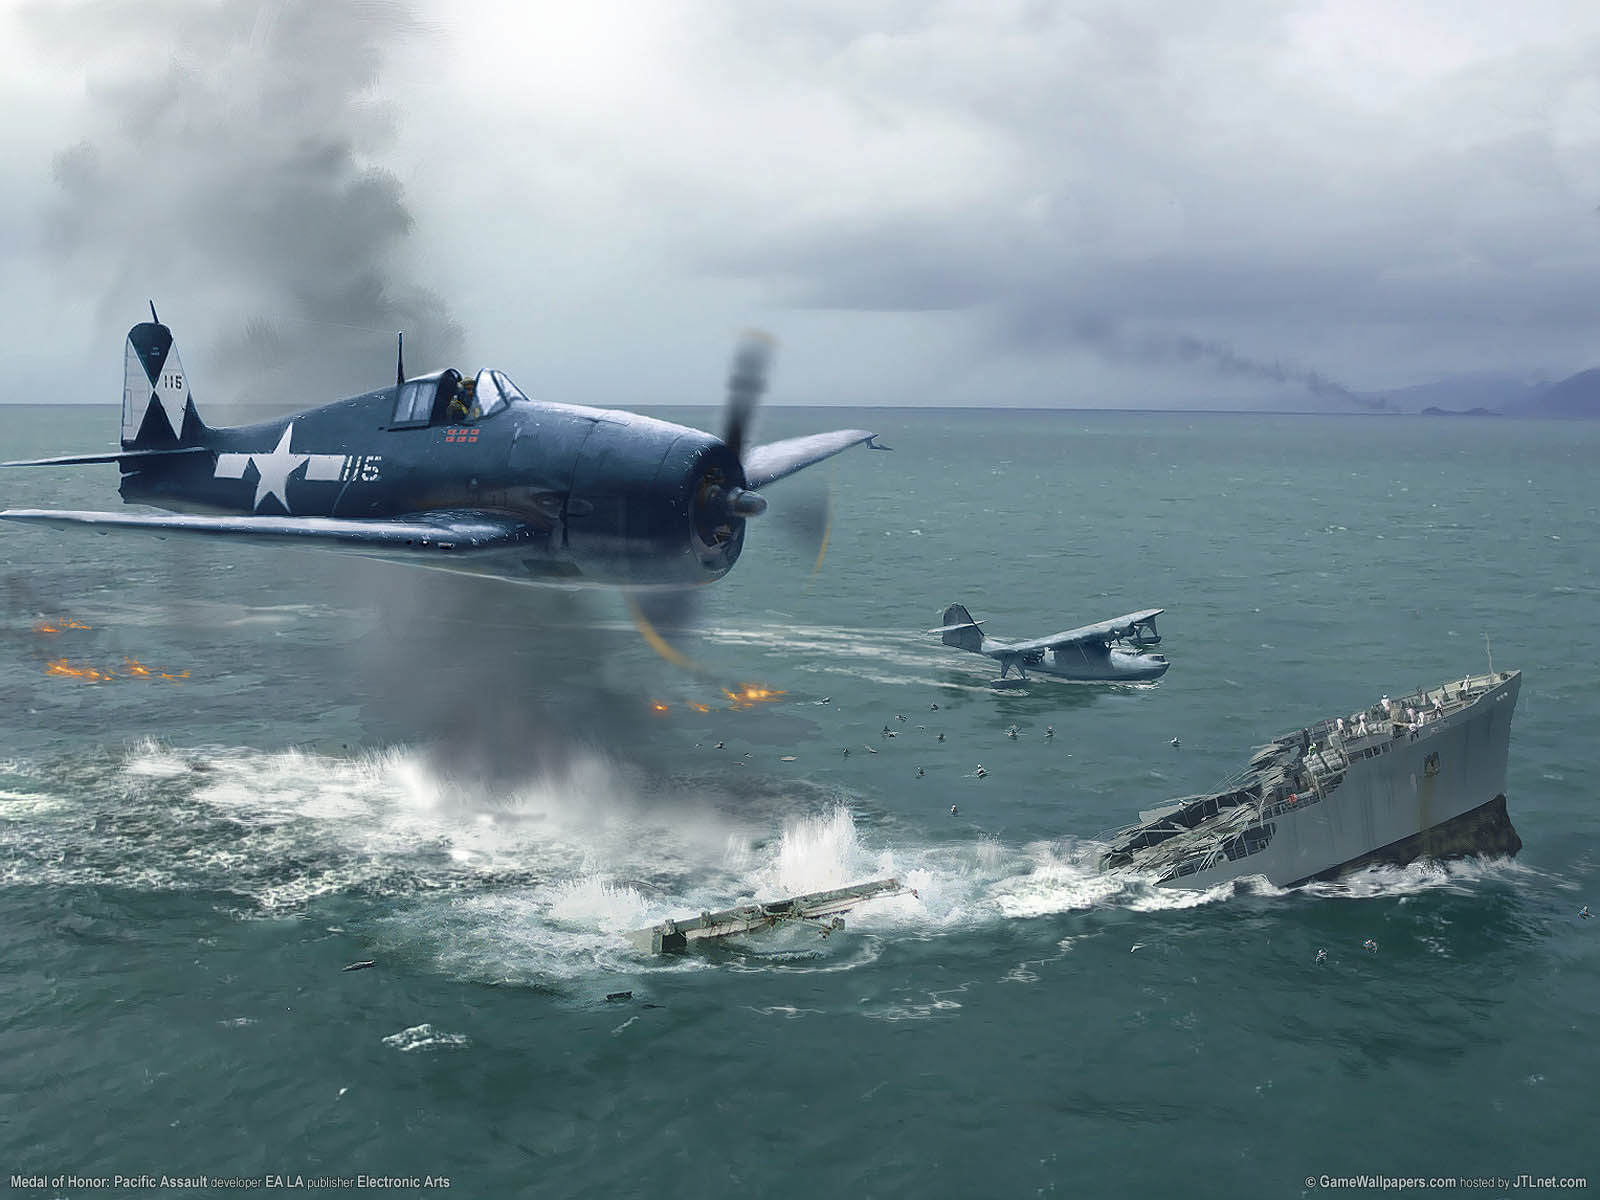 Medal of Honor%25253A Pacific Assault wallpaper 04 1600x1200